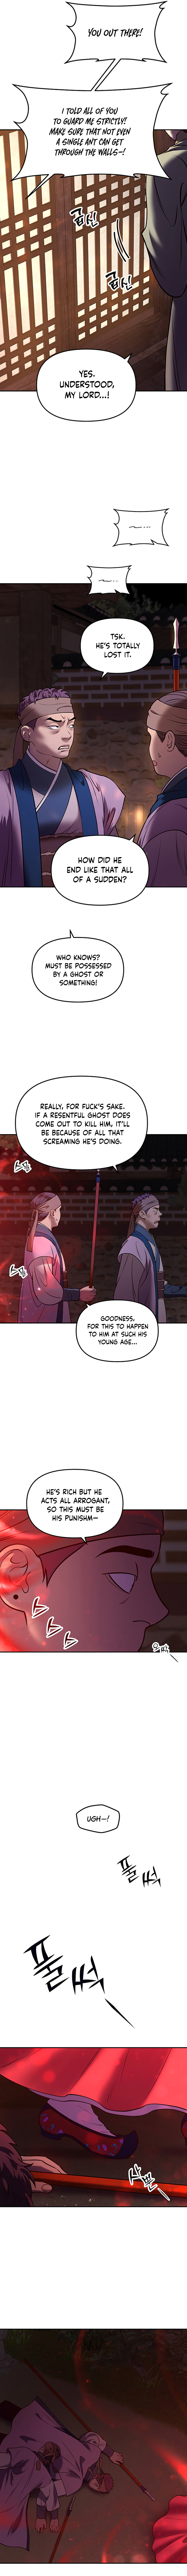 The Prince Of Myeolyeong - Page 3